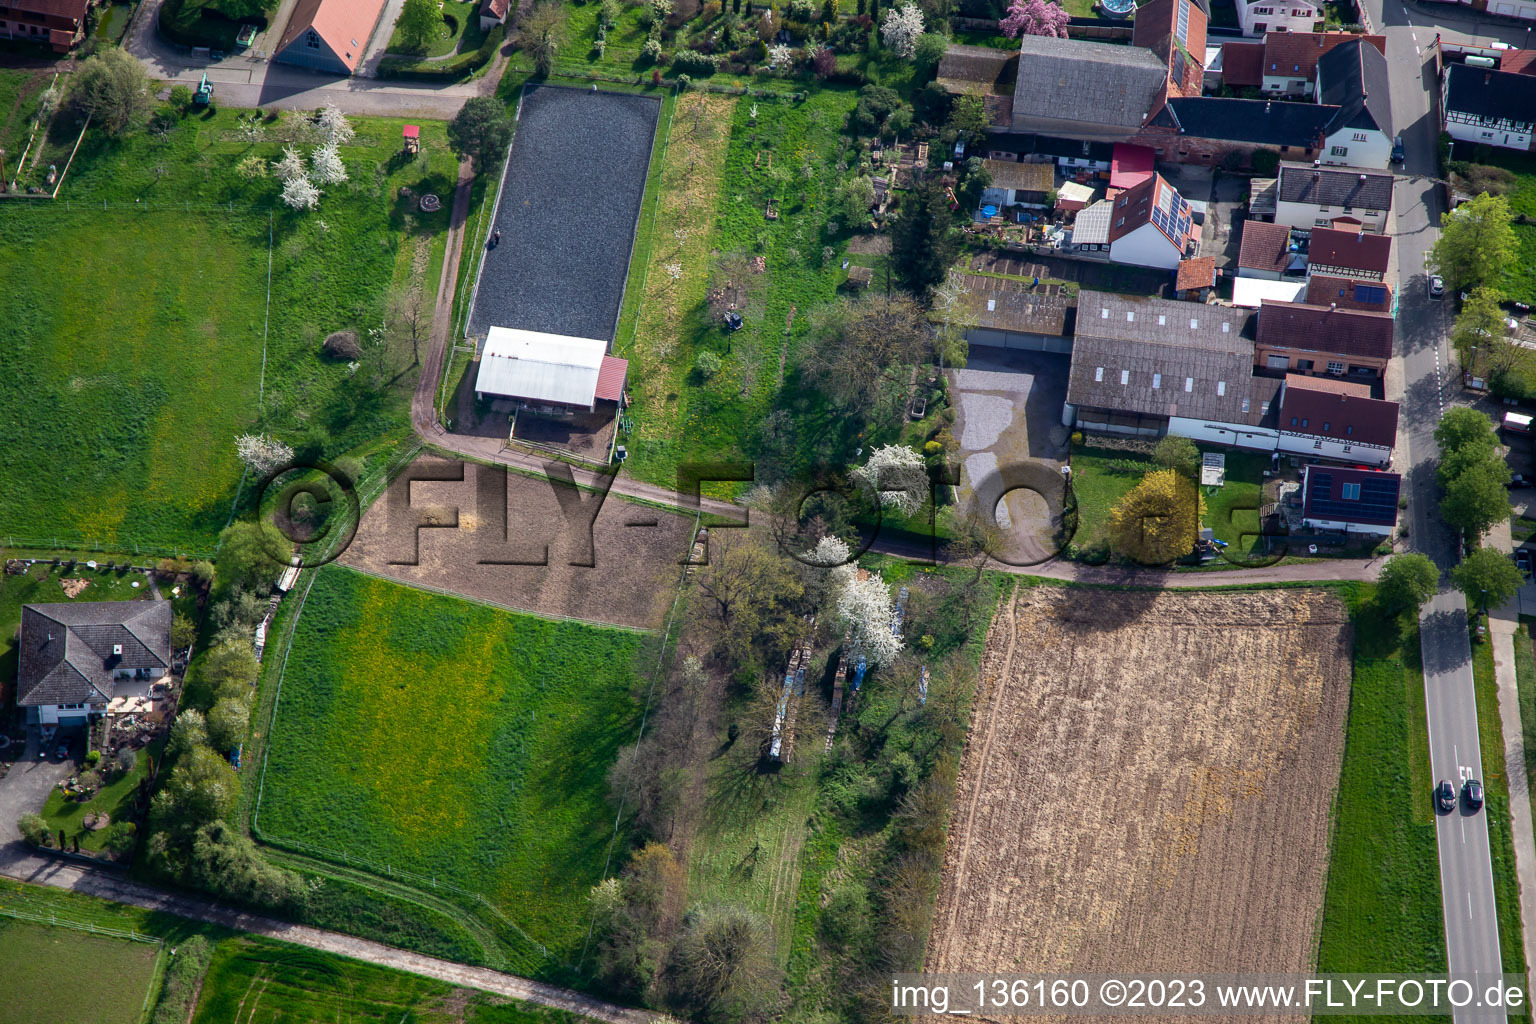 Equestrian facility at the cemetery in Winden in the state Rhineland-Palatinate, Germany from above